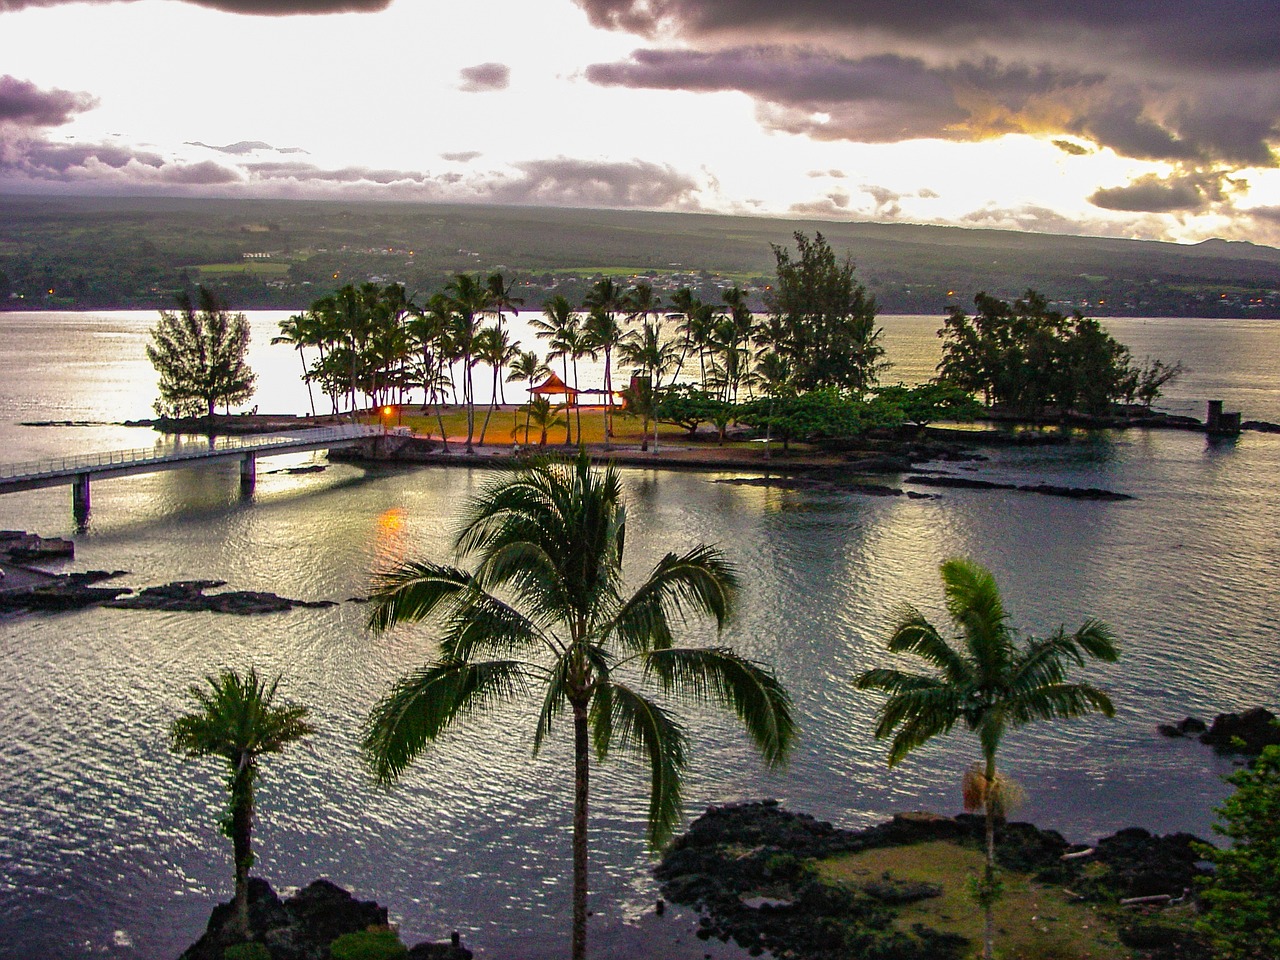 Hilo, Hawaii - A Day of Adventure and Culinary Delights